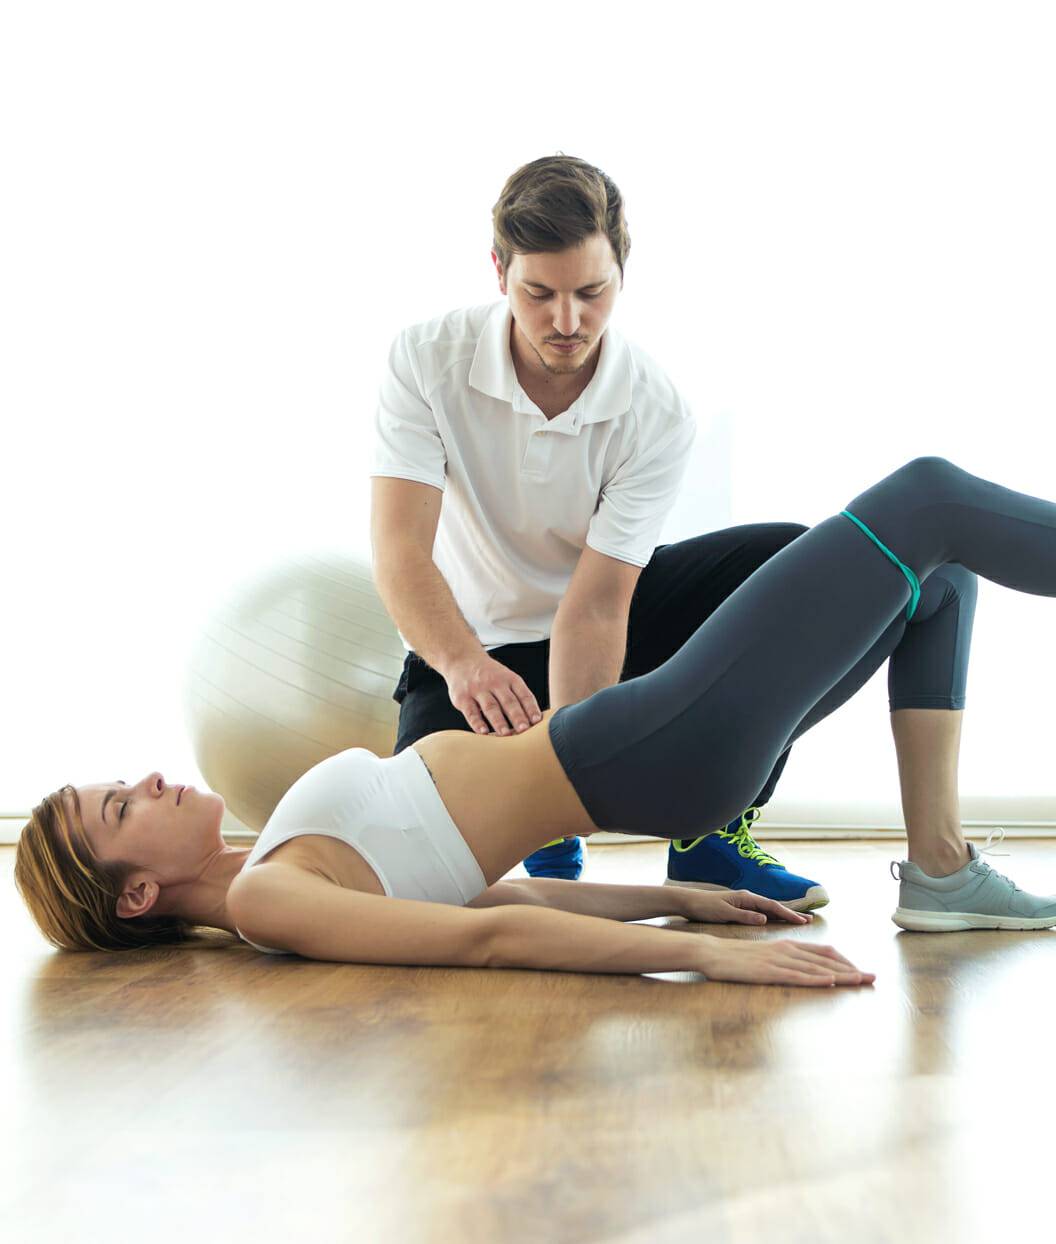 Is pelvic floor physical therapy worth it?